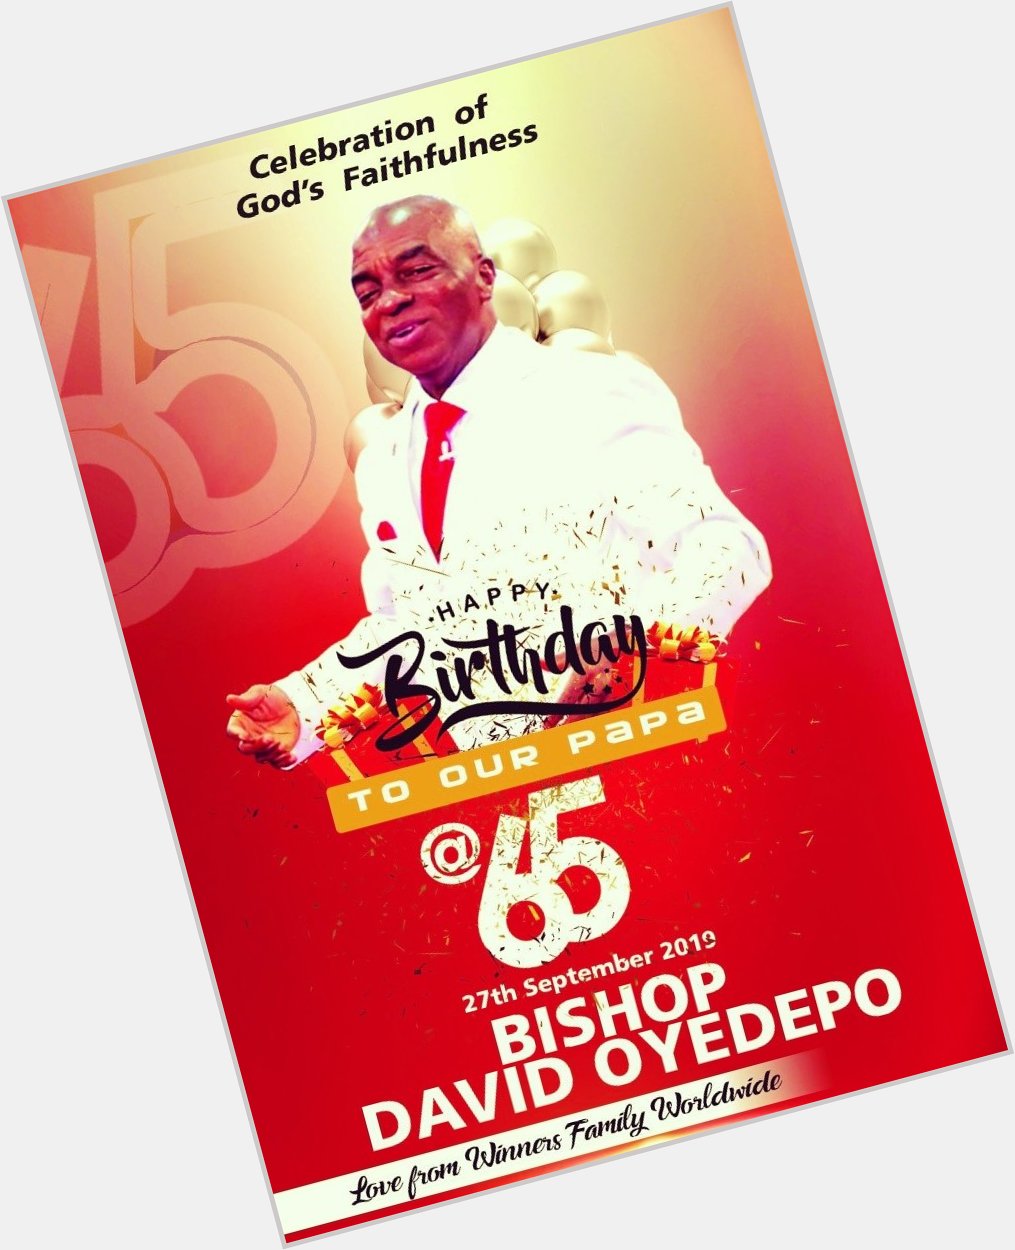 Happy Birthday Bishop David Oyedepo! Thanks for being a blessing to the world 